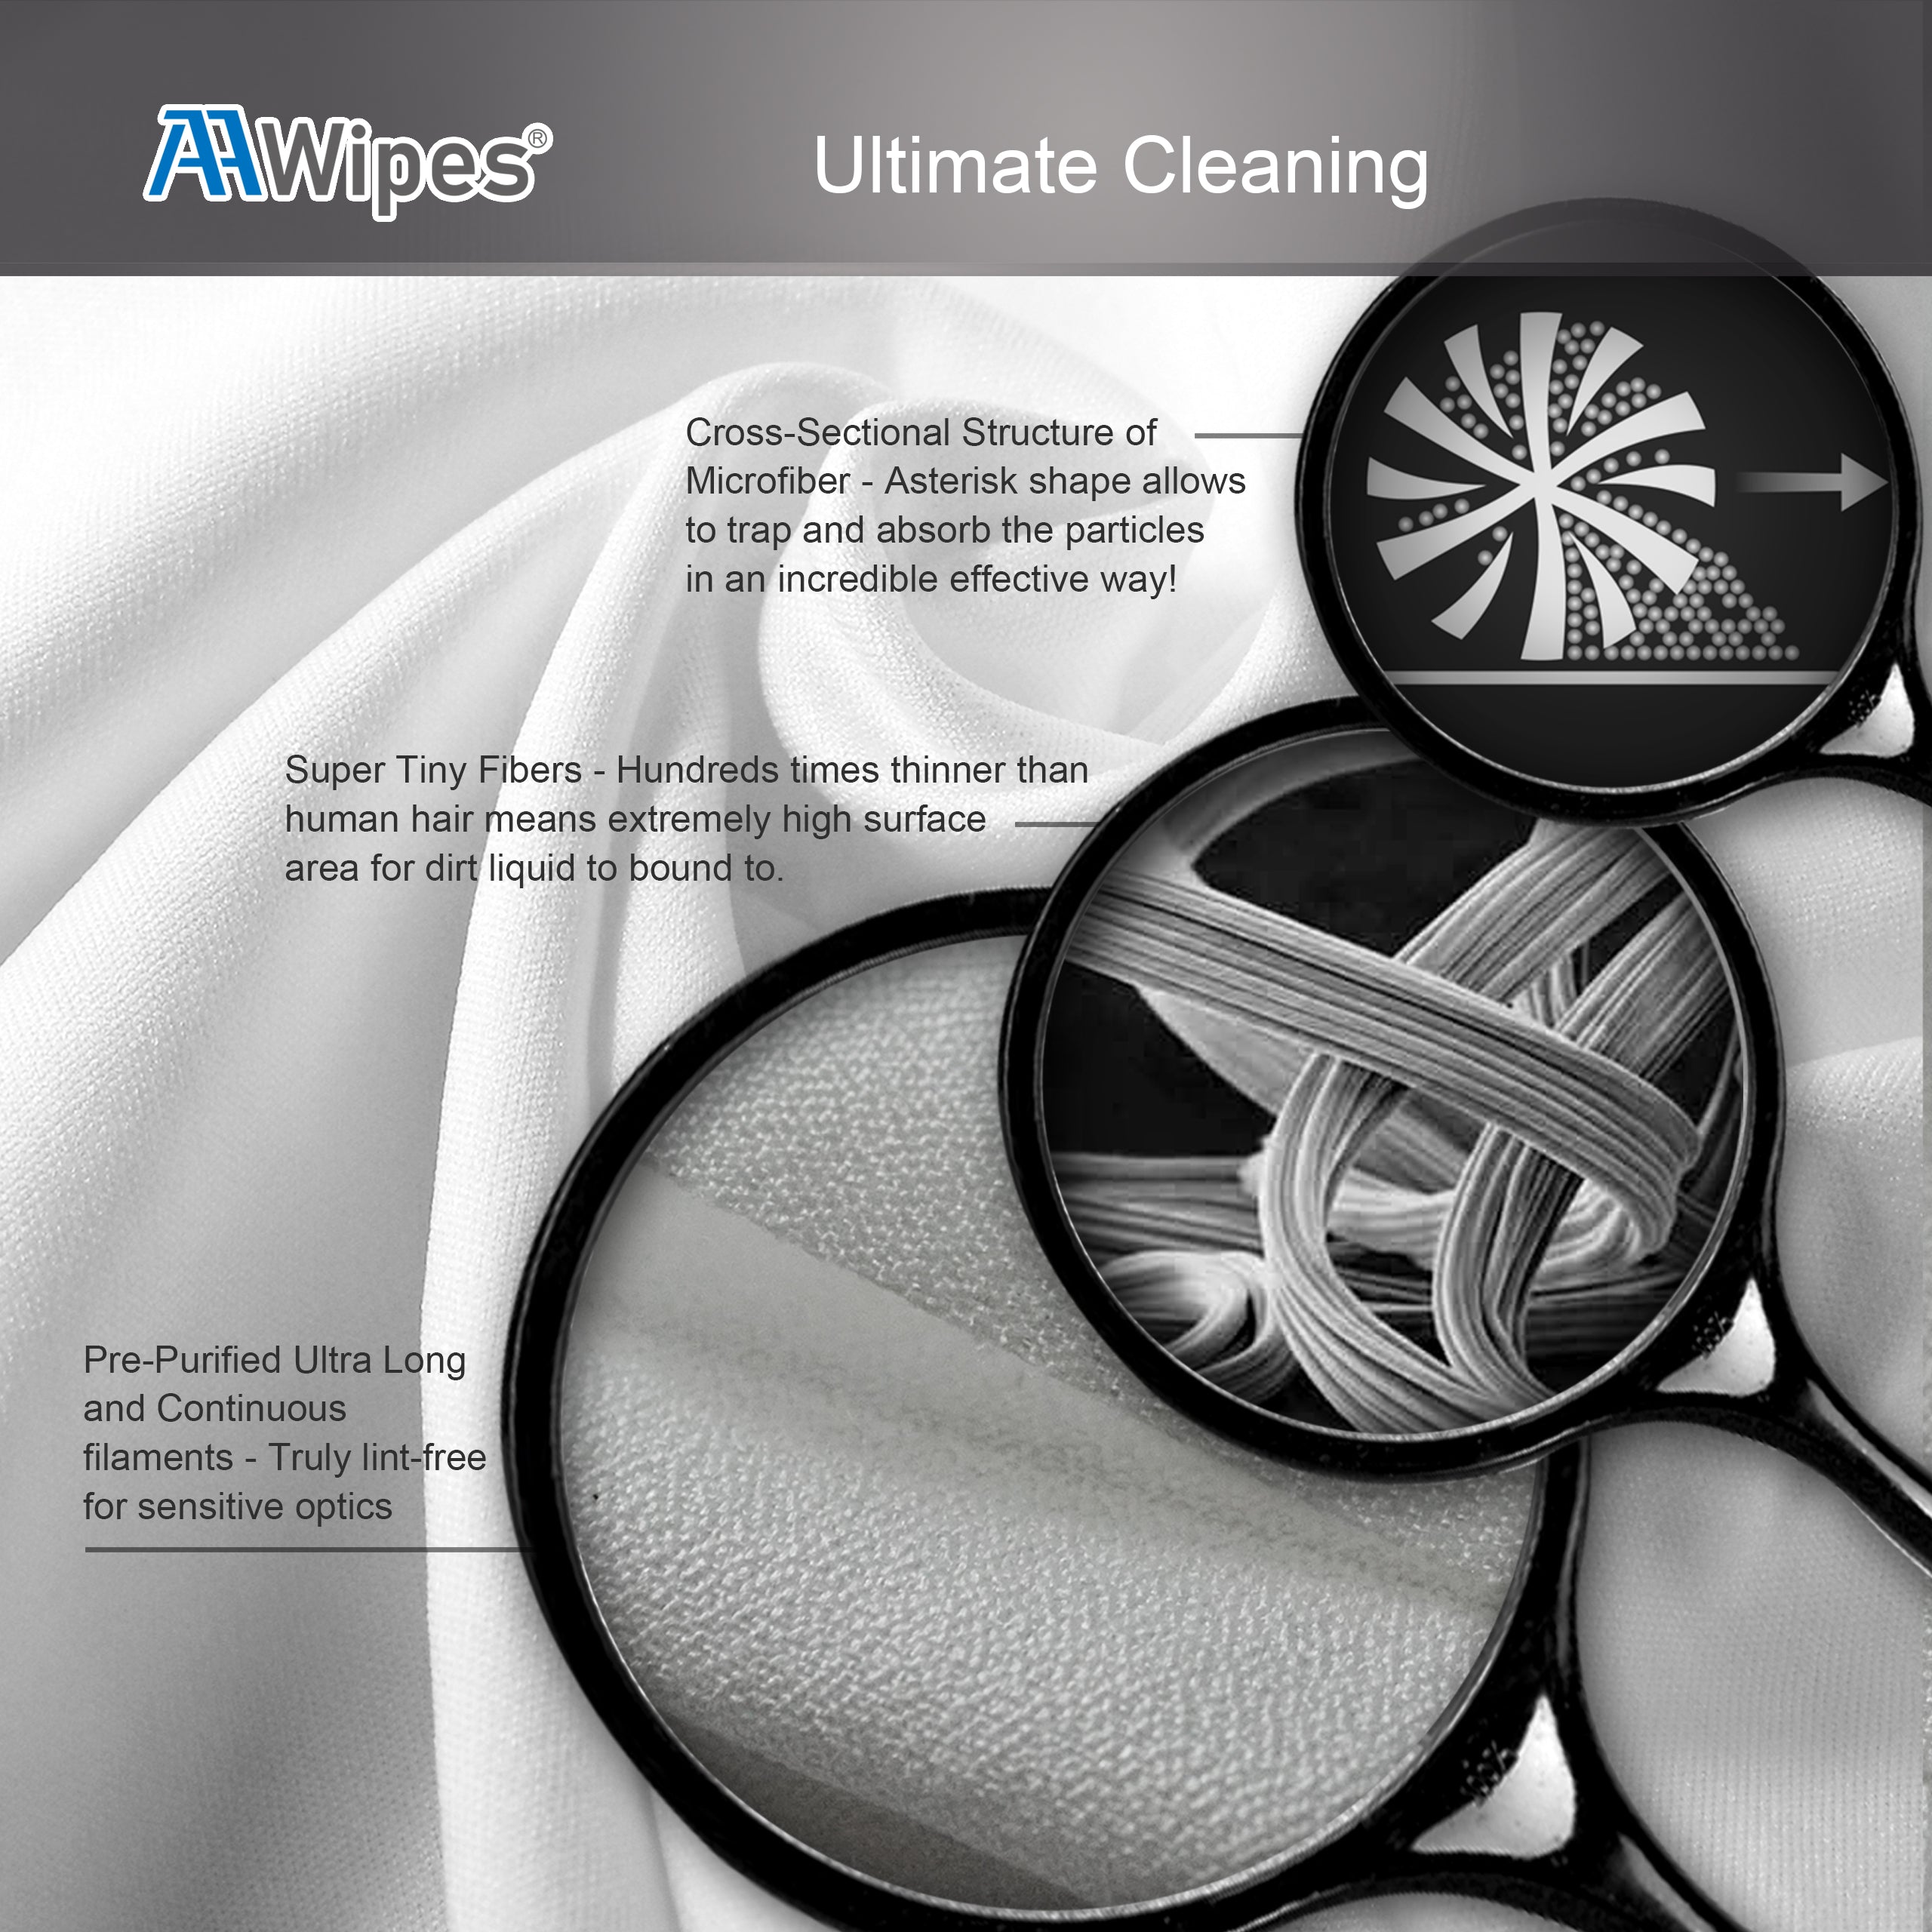 Cleanroom Ultrasoft Cloth Ultrafine Microfiber Wipers 9"x9" for Sensative Auto Optics Lens Cleaning(Starting at 1 Box with 2,000 Wipes per 20 Bags, 180gsm), Laser Sealed Edge, Class 100 Cloths (No. MF18009)